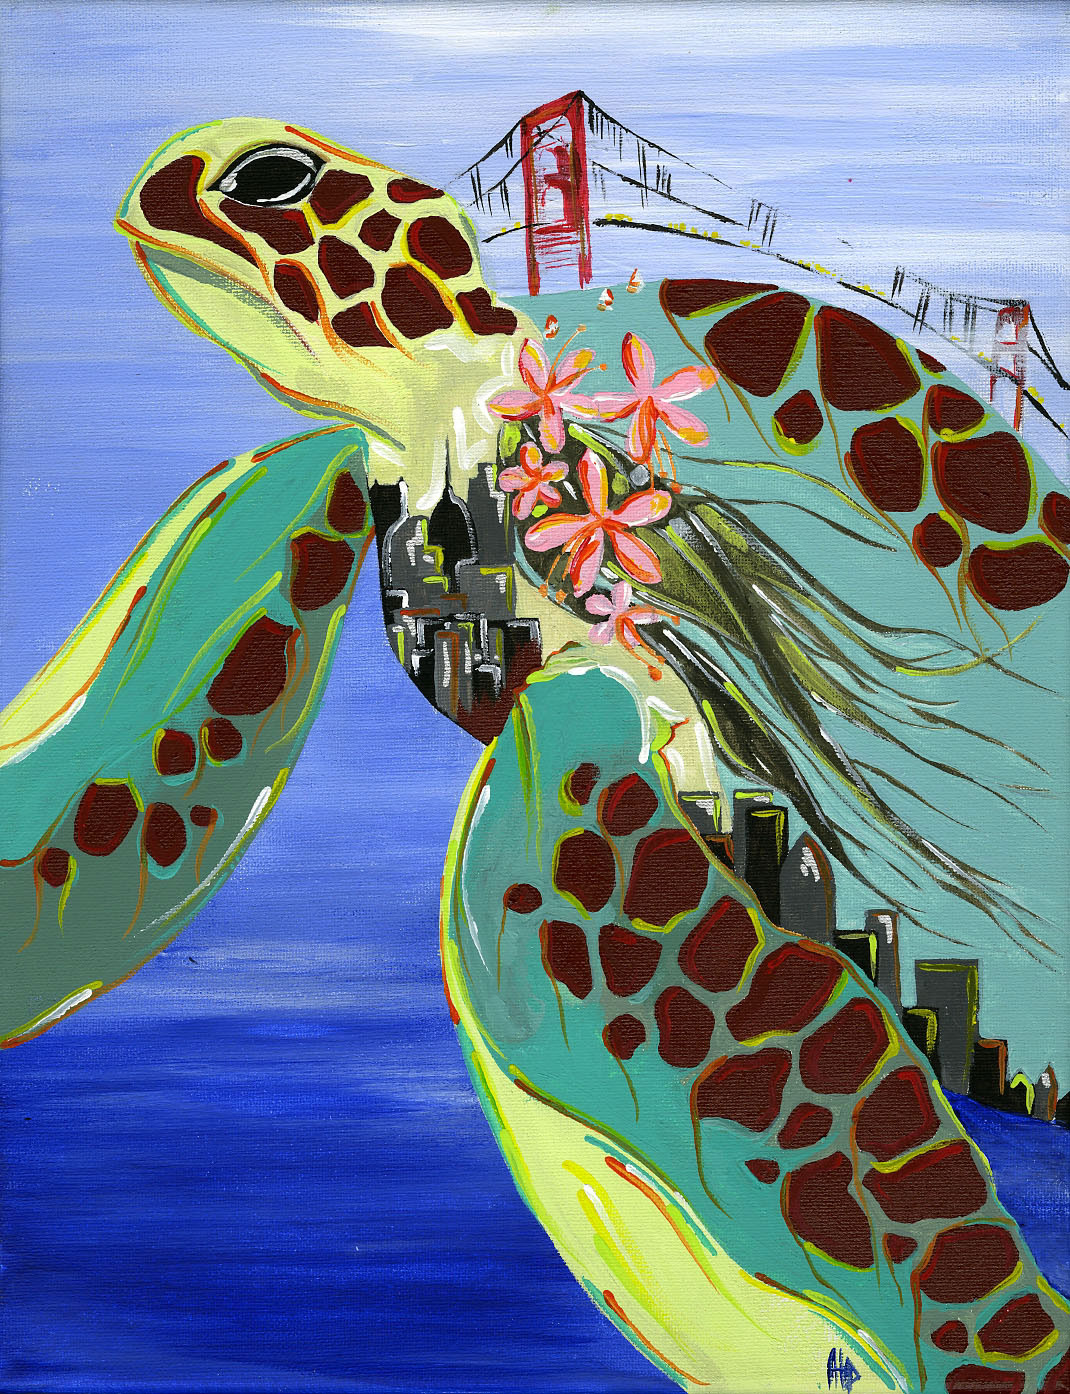 A swimming turtle contains the skyline of San Francisco, with the Golden Gate Bridge on its back, in acrylic